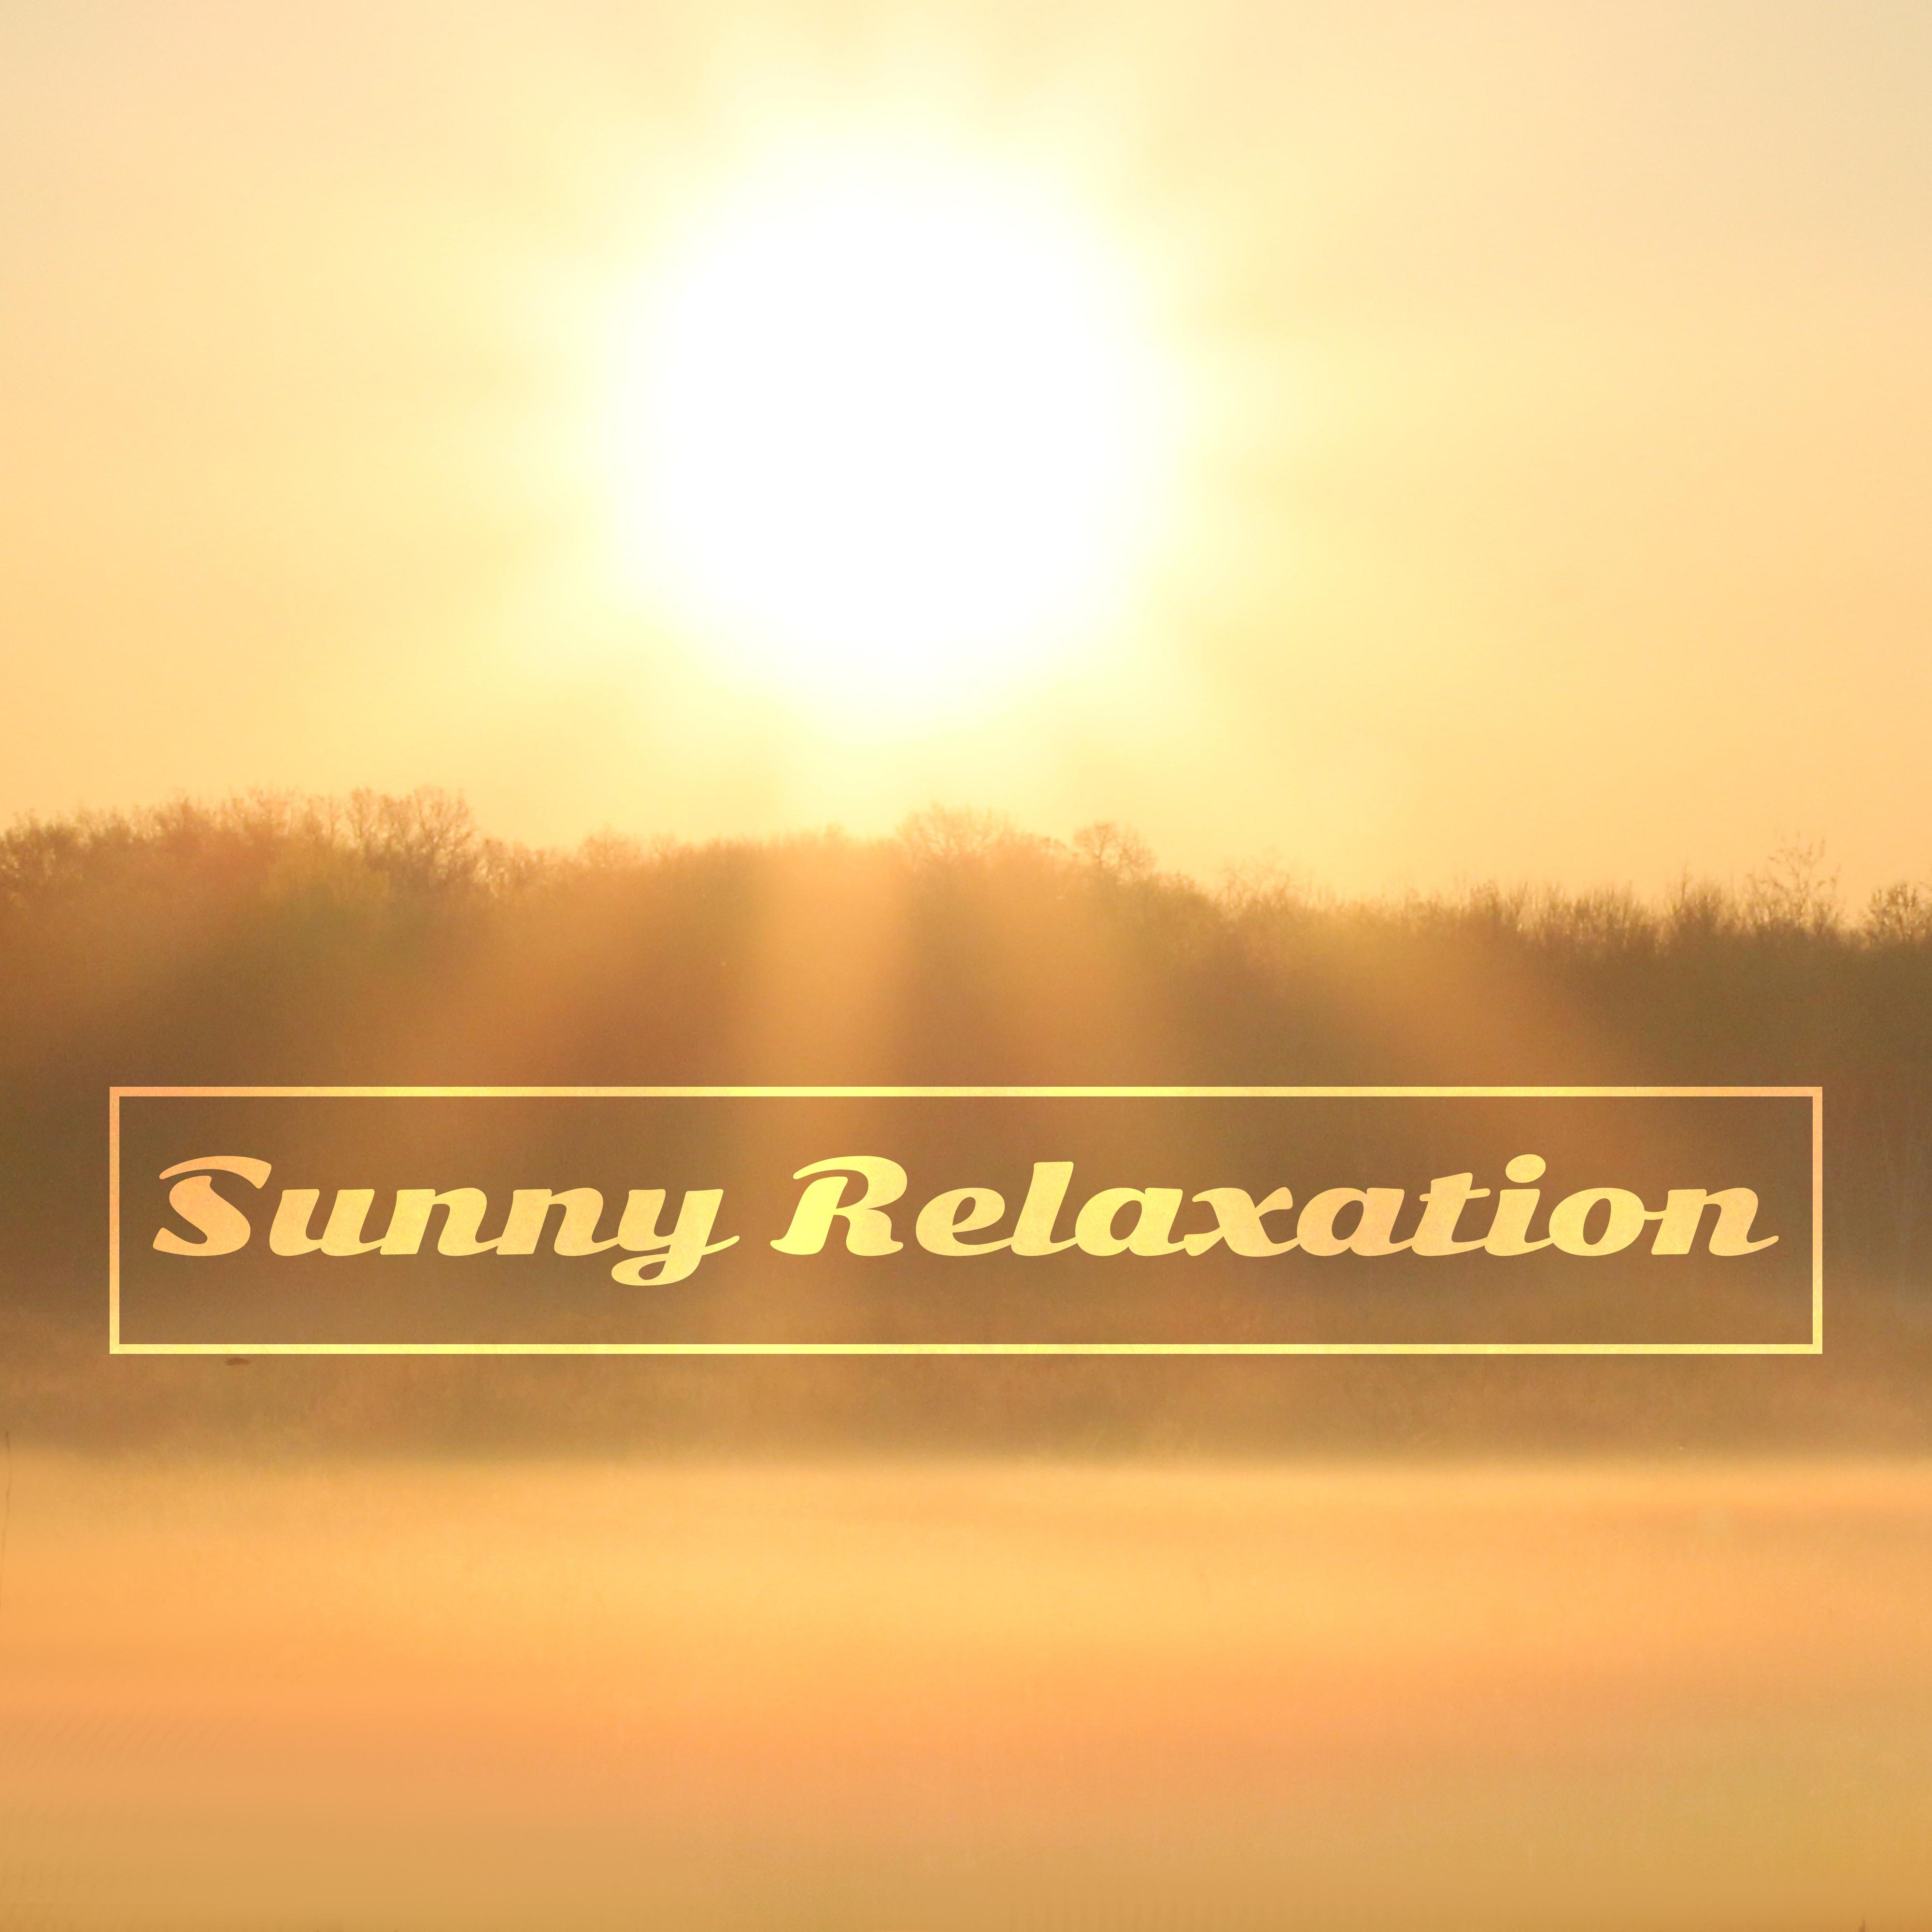 Sunny Relaxation – Hot Riviera, Sounds of Sea, Summer Chill, Relax on the Beach, Free Birds, Holiday Under Palms, Best Chill Out Music